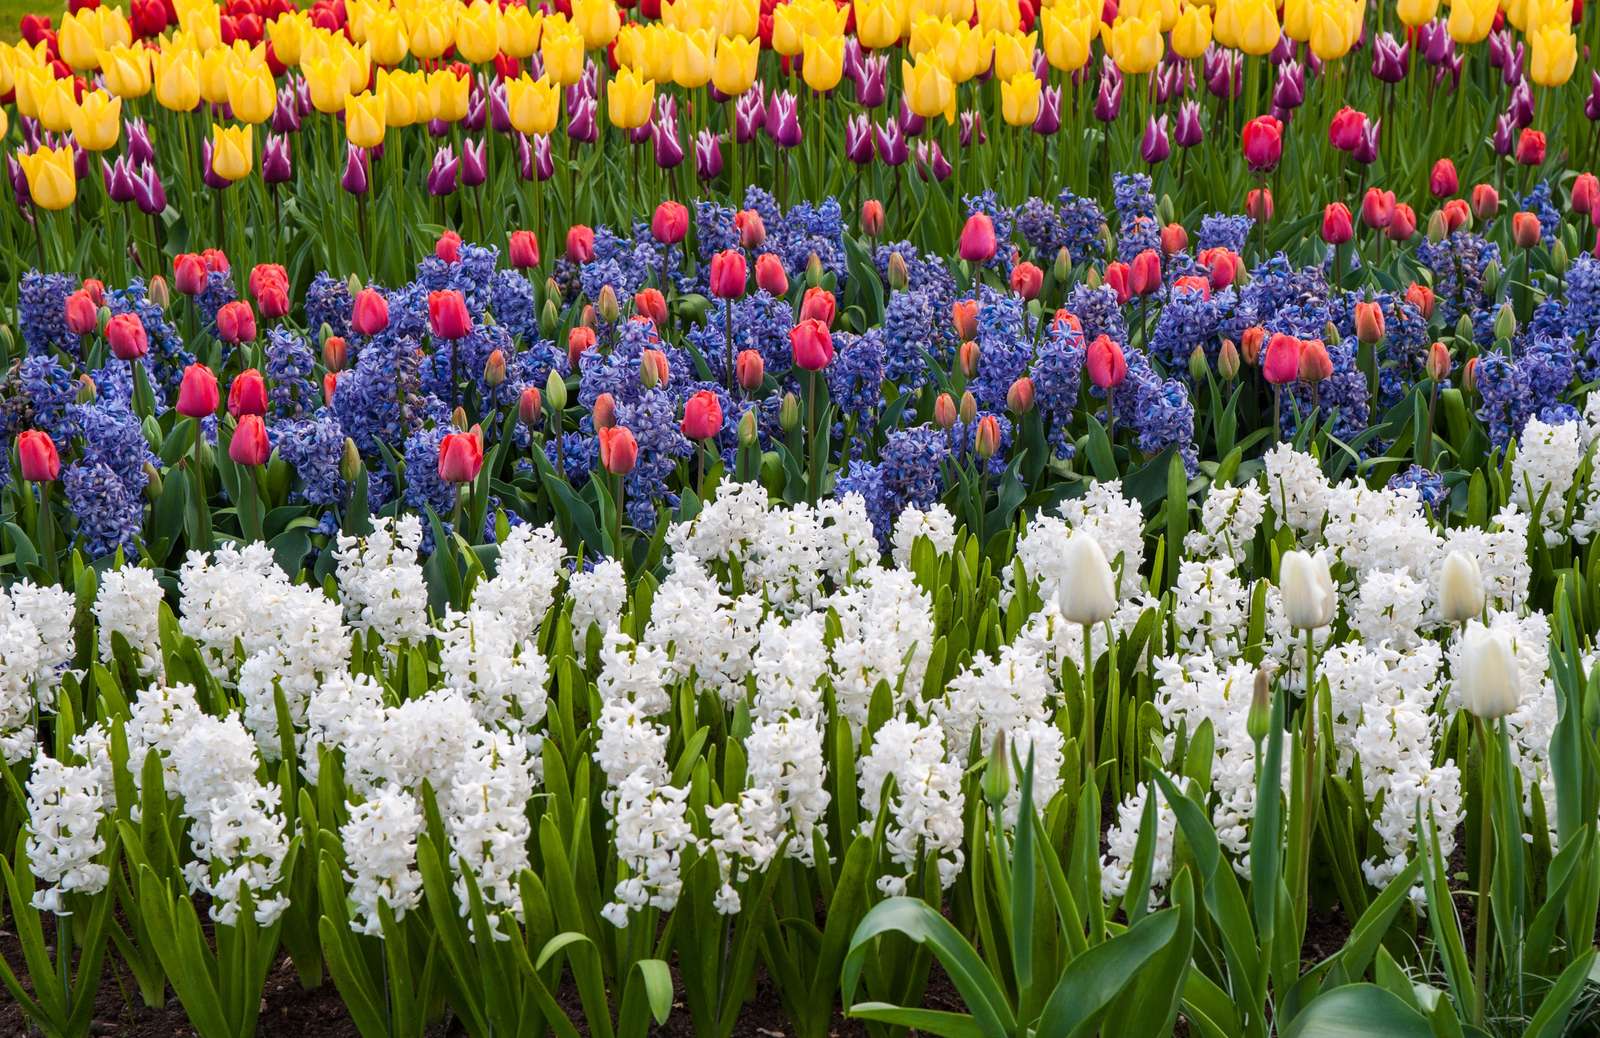 Flower Beds puzzle online from photo